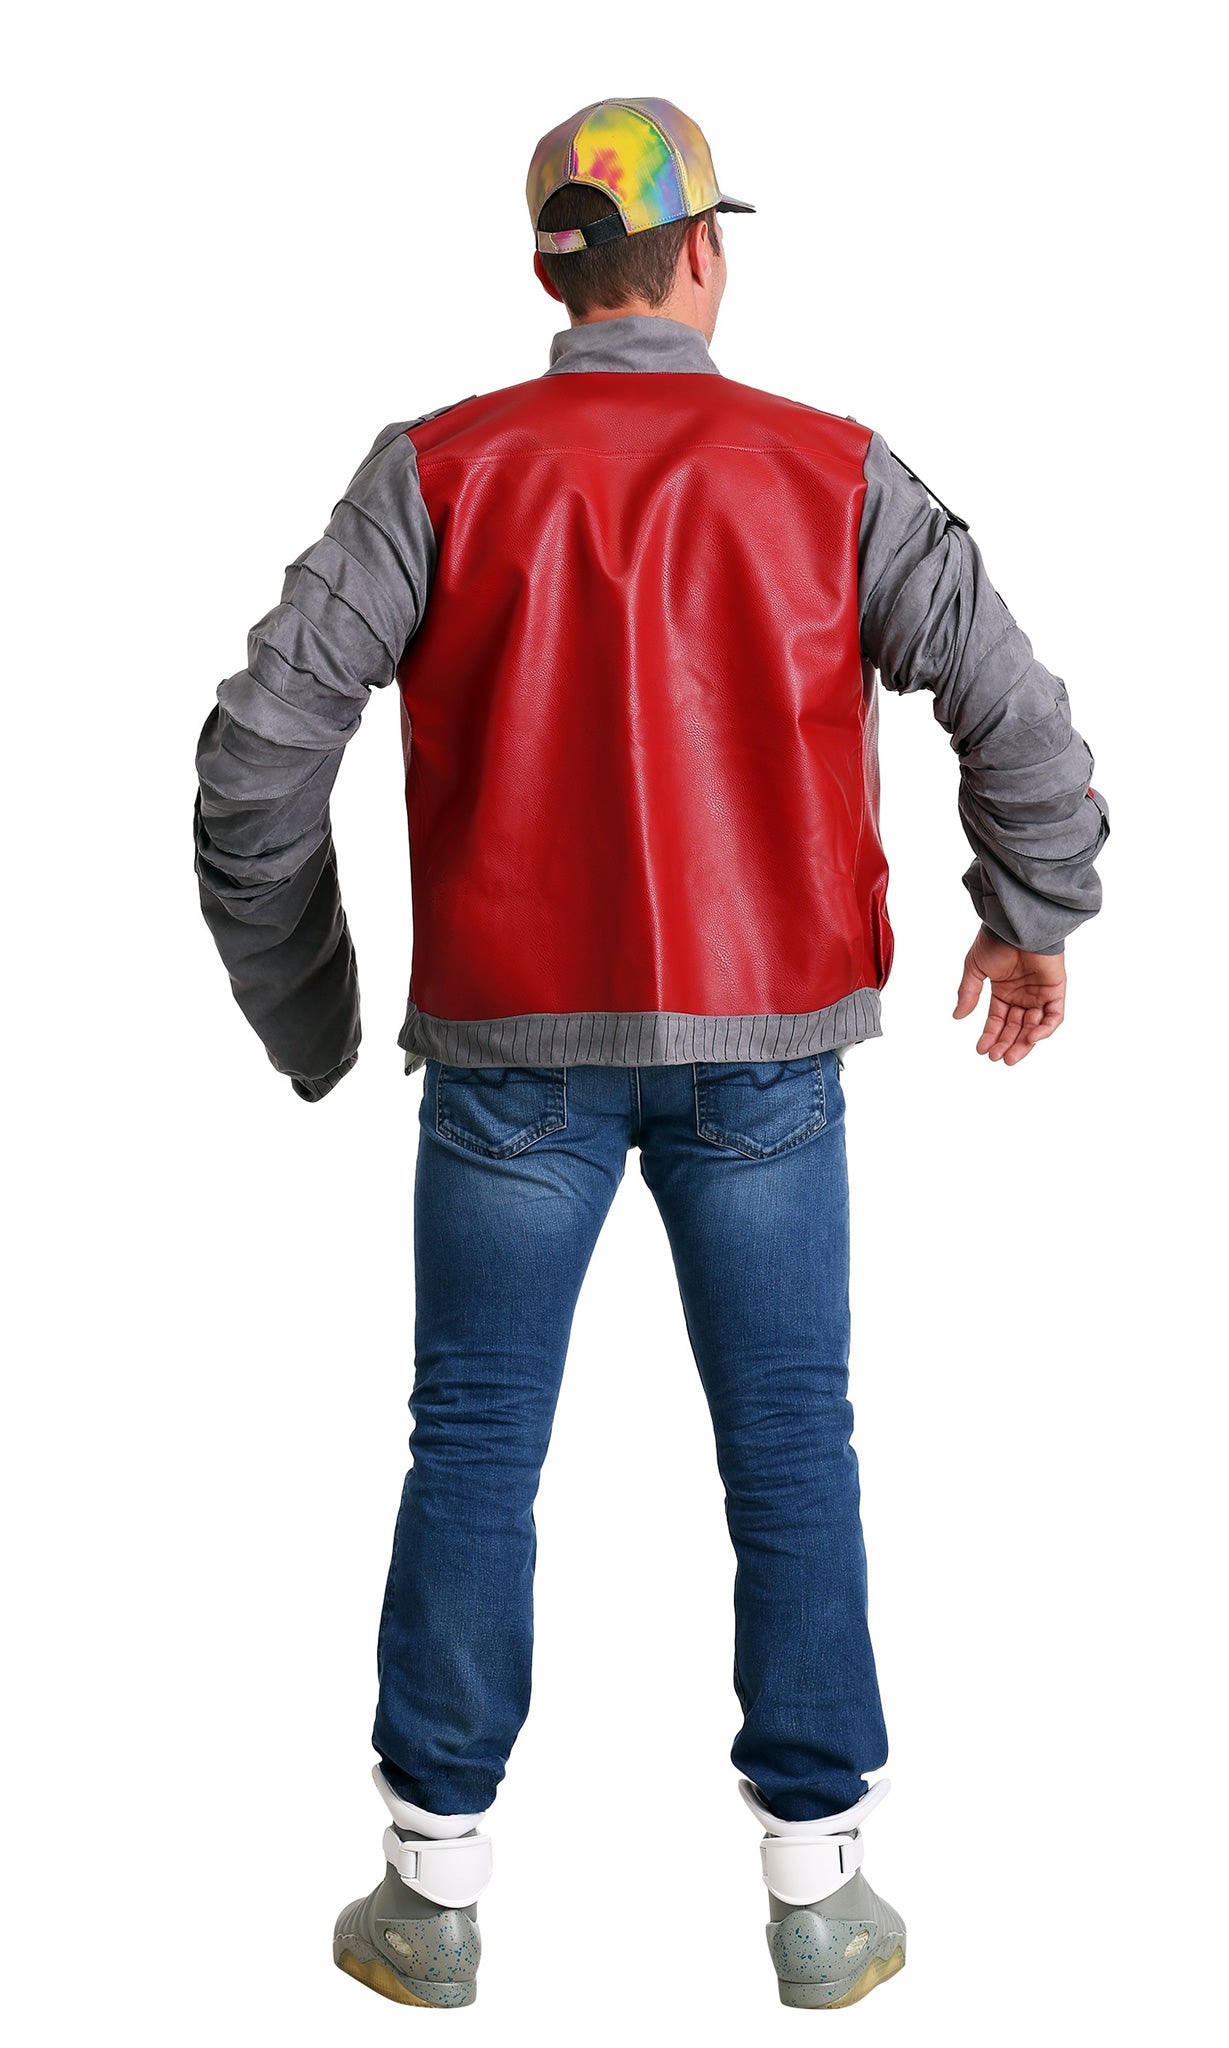 Back view of Marty McFly costume with hat and jacket